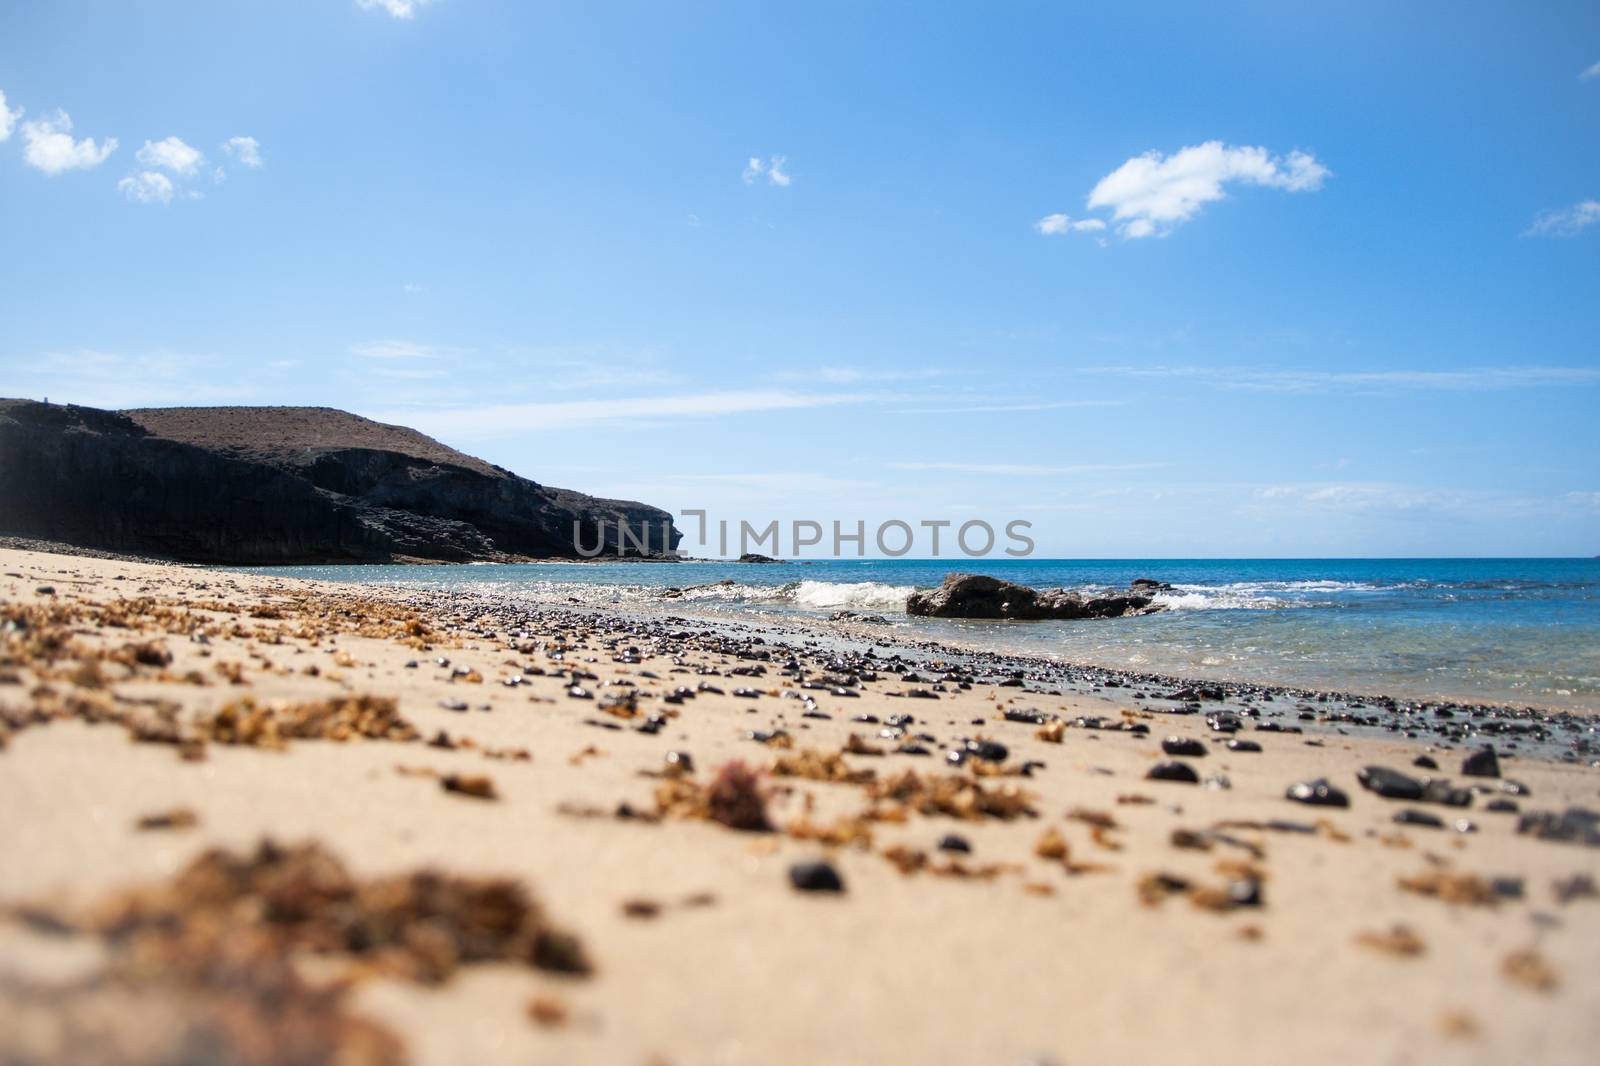 Lonely beach with volcanic dark stones and seaweed on it. Blue sky and a dark cliff on the background